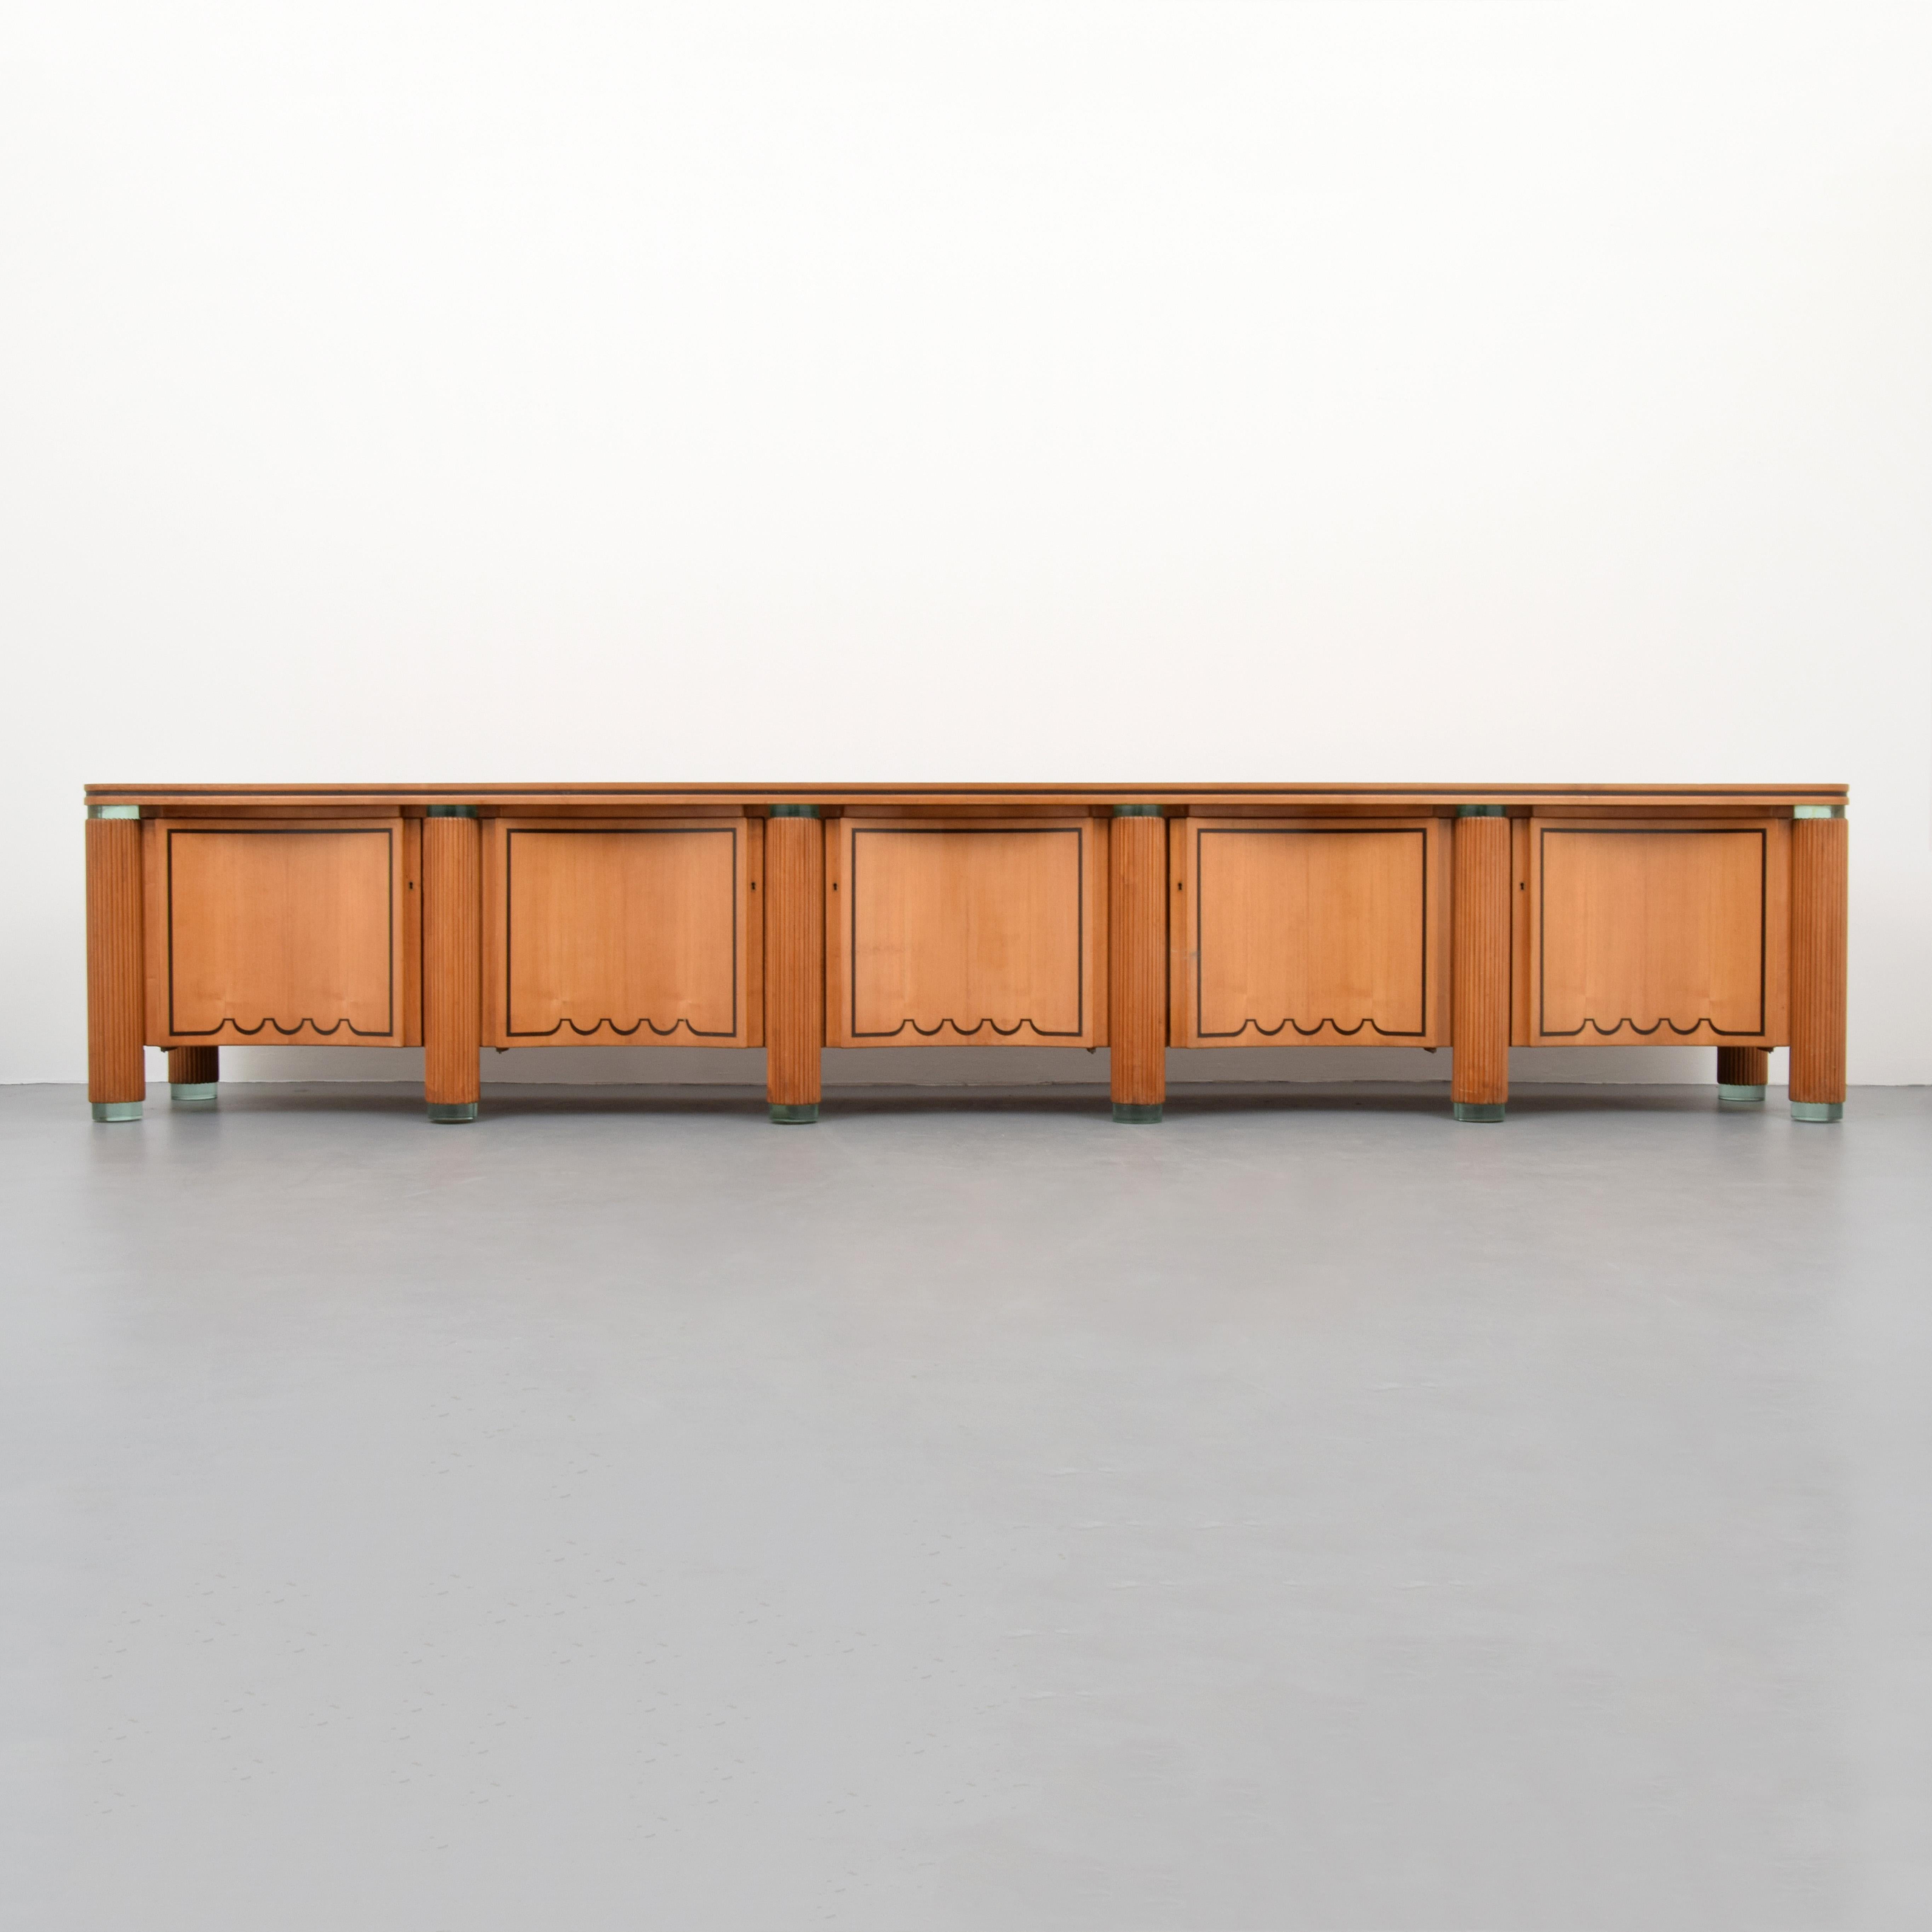 Monumental and important cabinet attributed to Giuseppe Terragni (Italian, 1904-1943) from the Novecento Italiano period. Six glass feet are spaced equally along the front of the cabinet with two glass feet in the rear. Each column is wrapped with